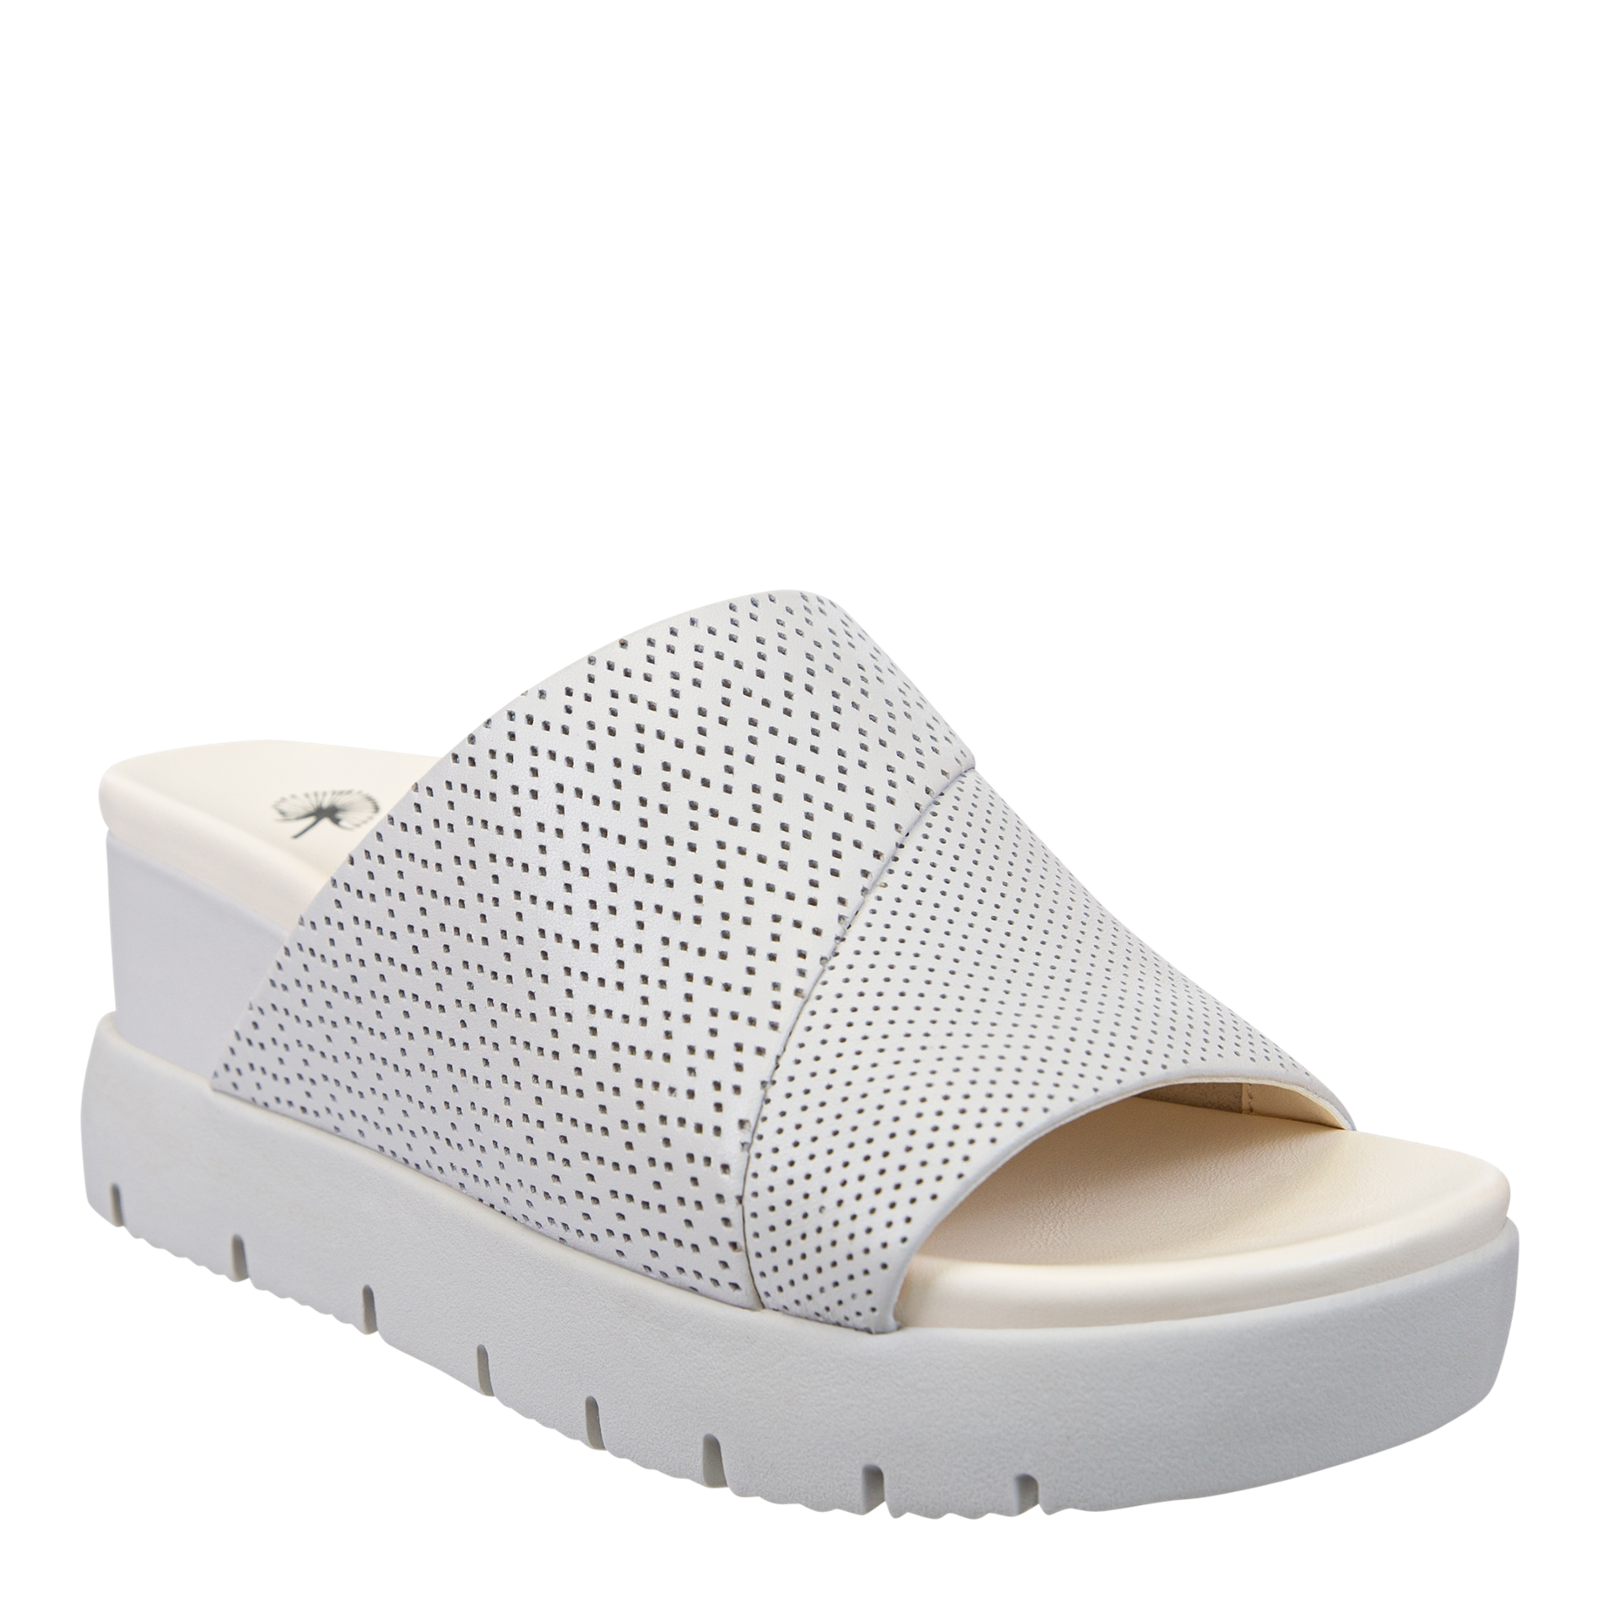 OTBT - NORM in WHITE Wedge Sandals